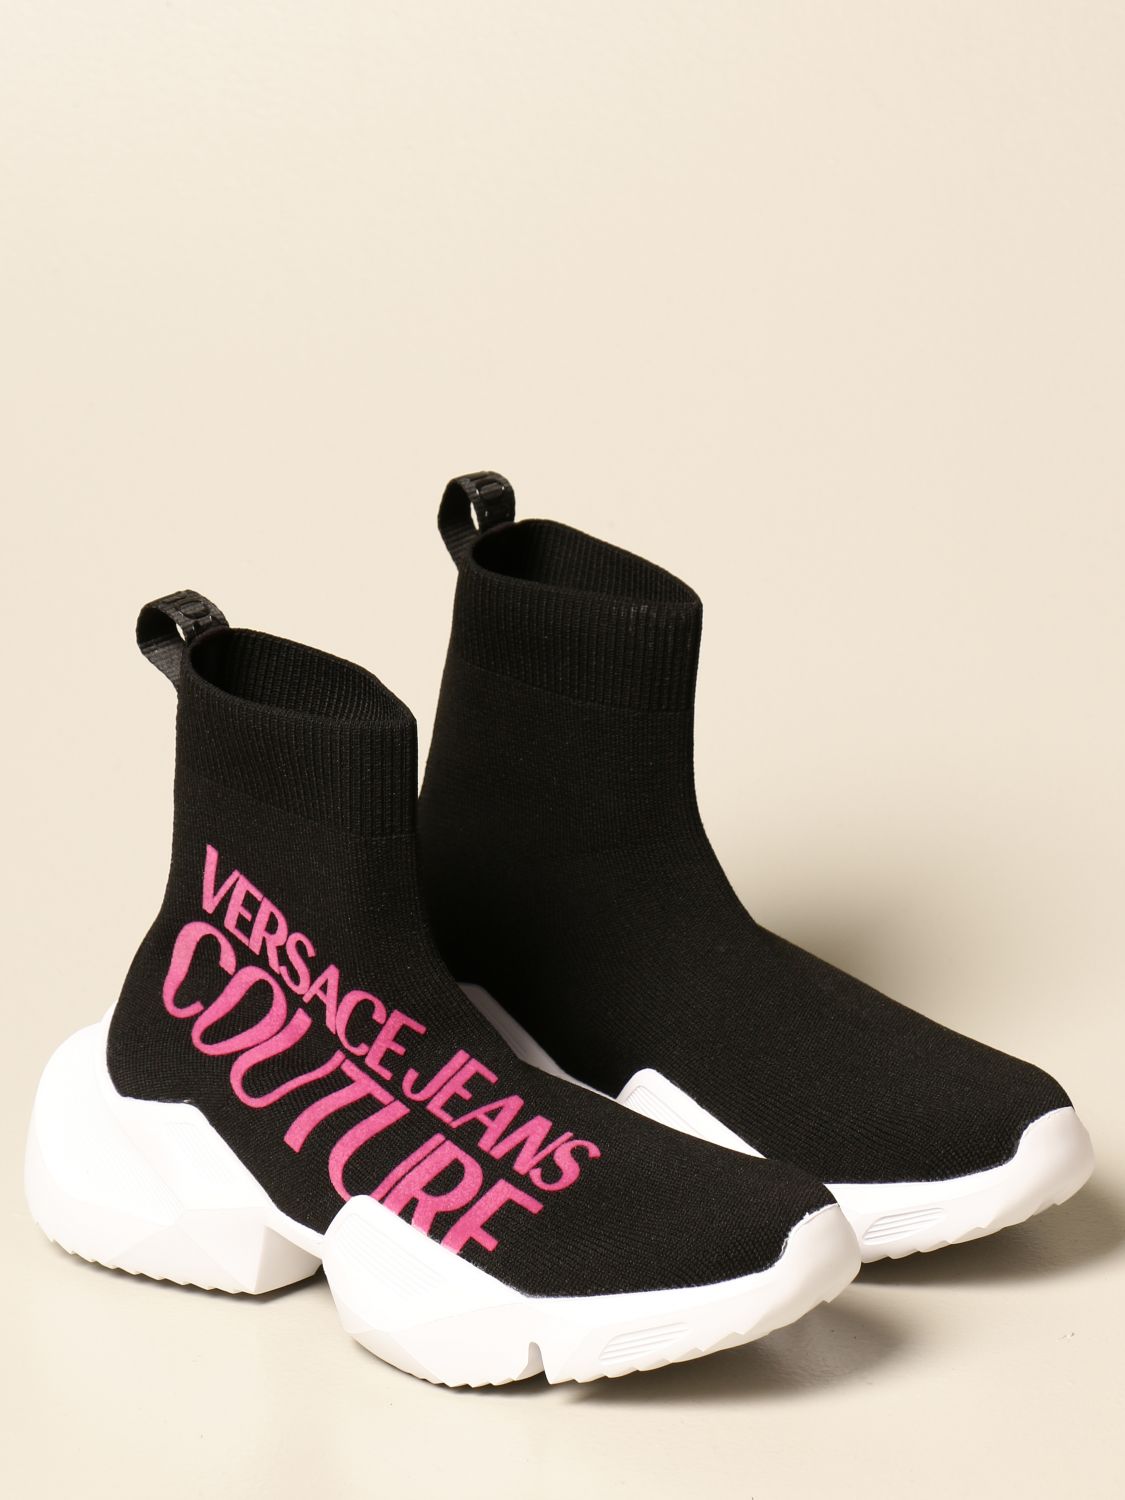 VERSACE JEANS COUTURE: Shoes women | Sneakers Versace Jeans Couture ...